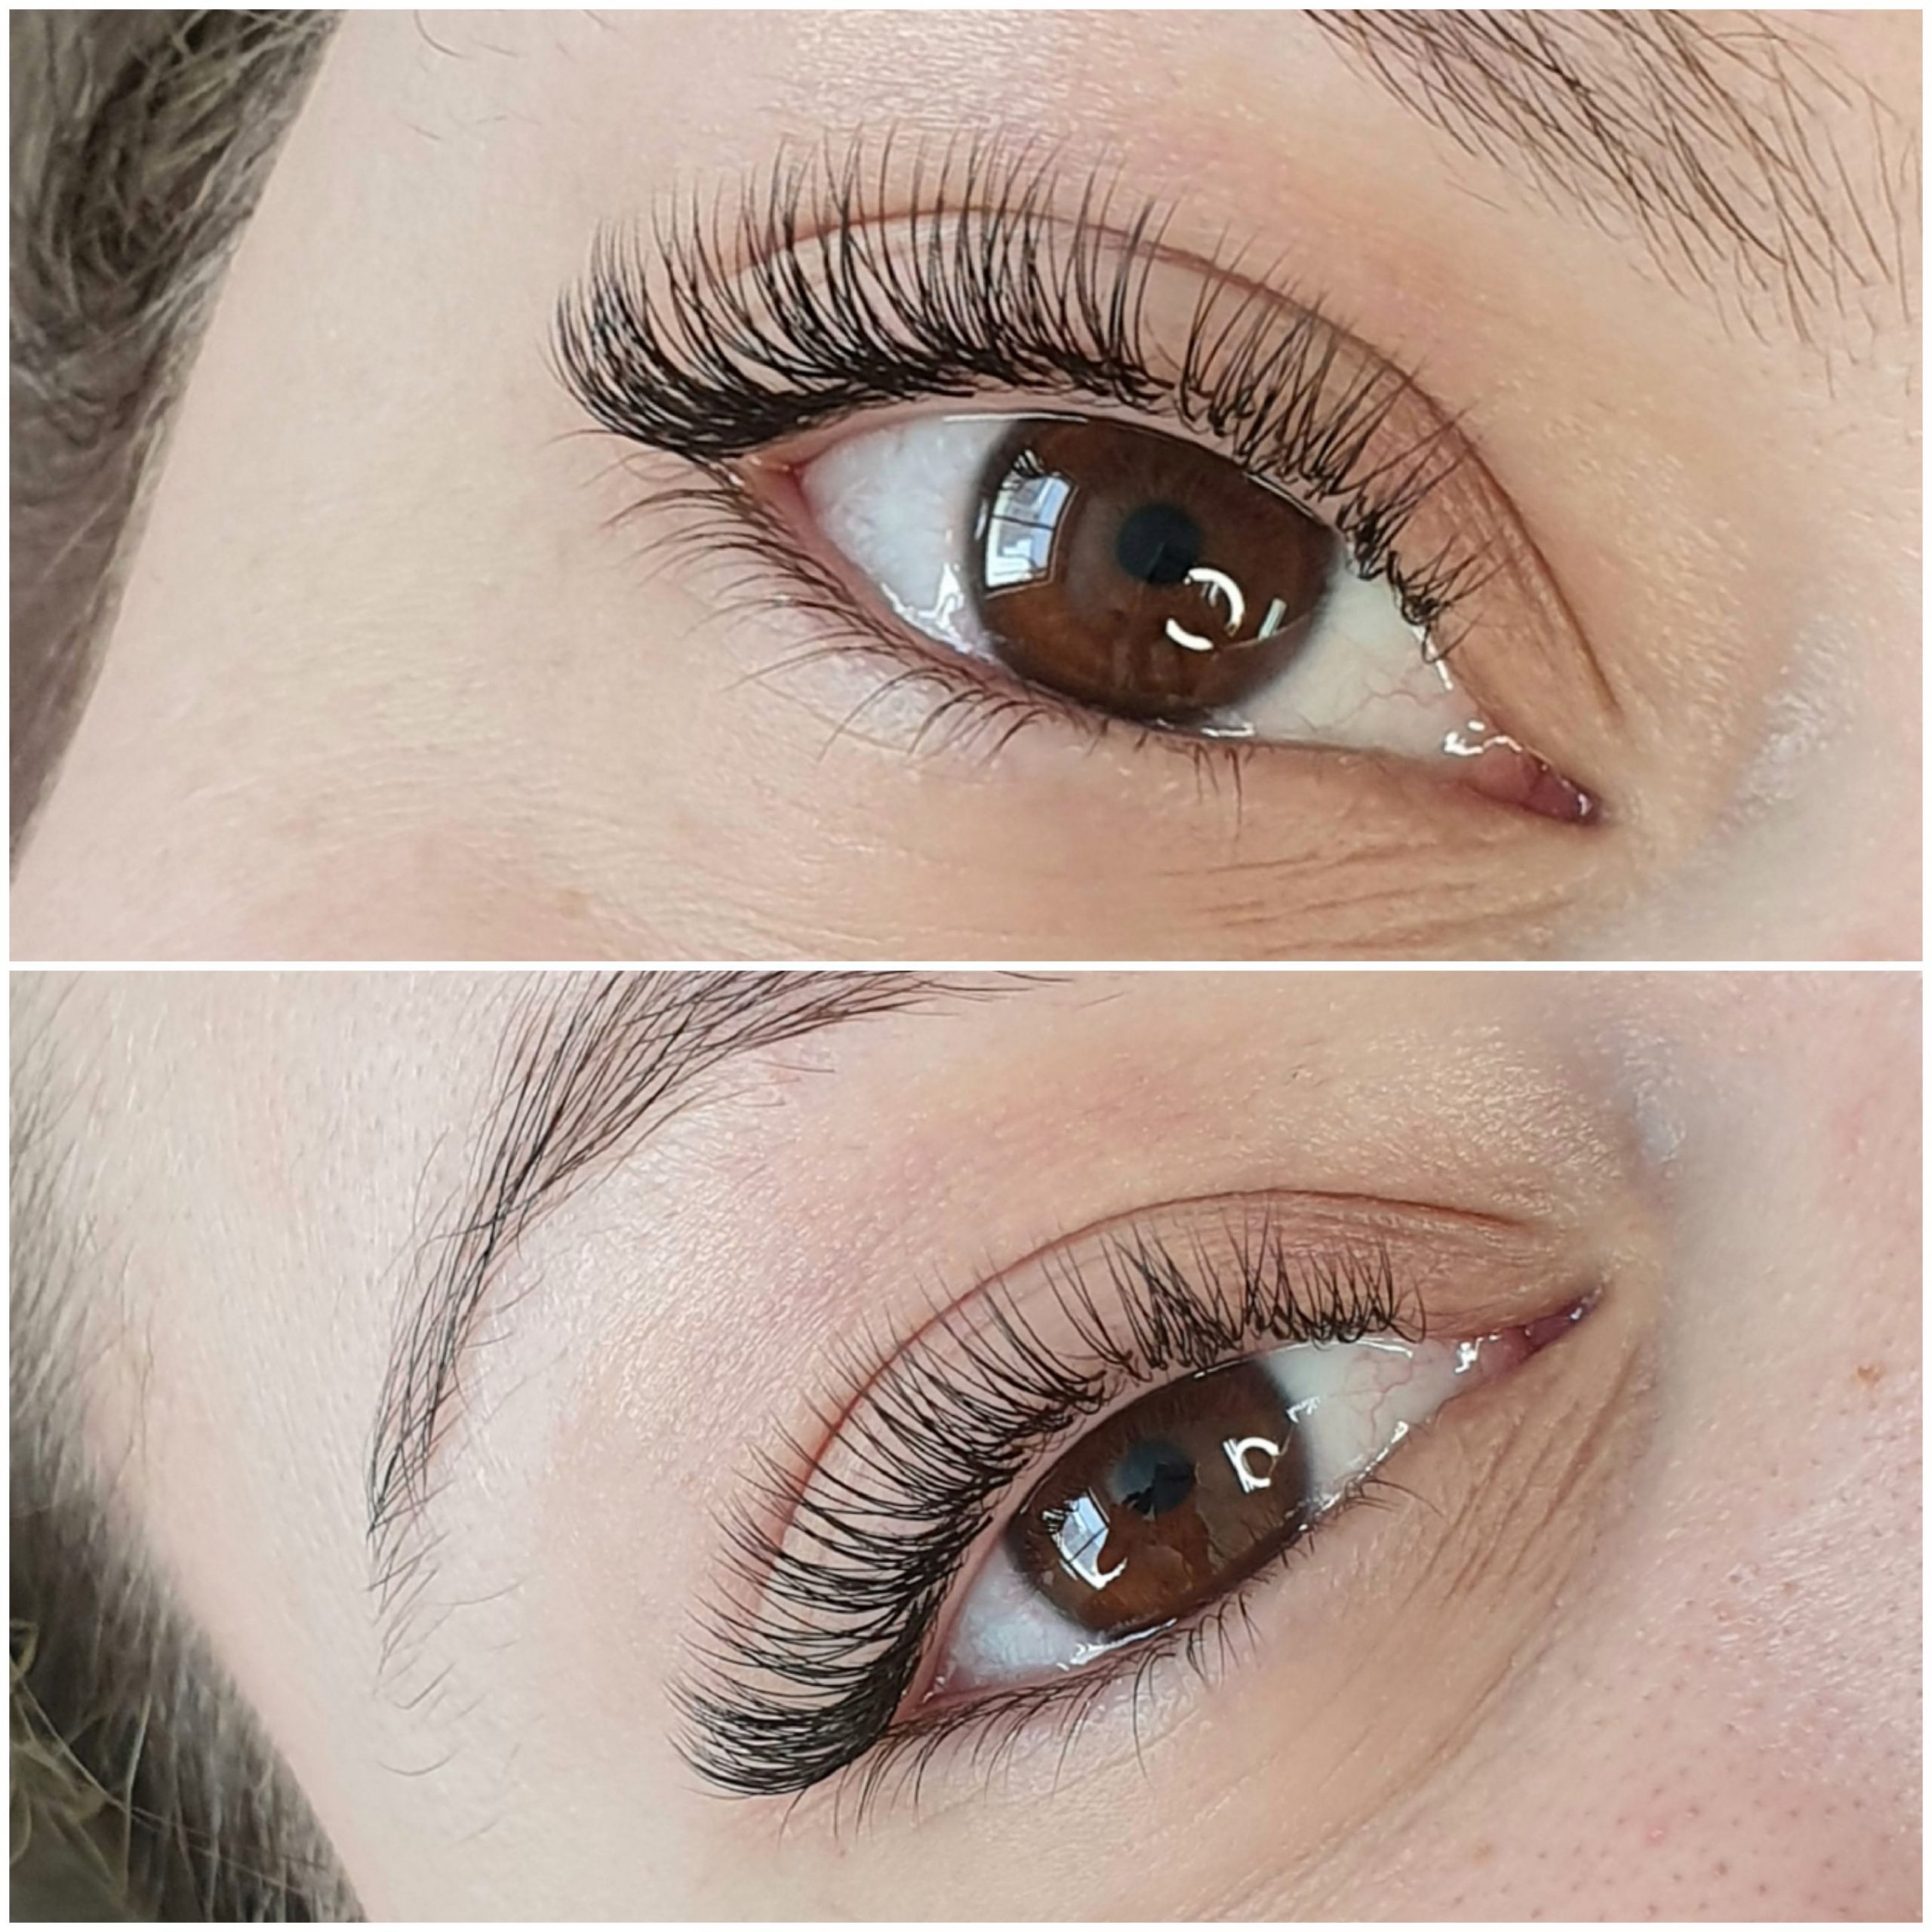 stunning lash set to compliment pretty brown eyes